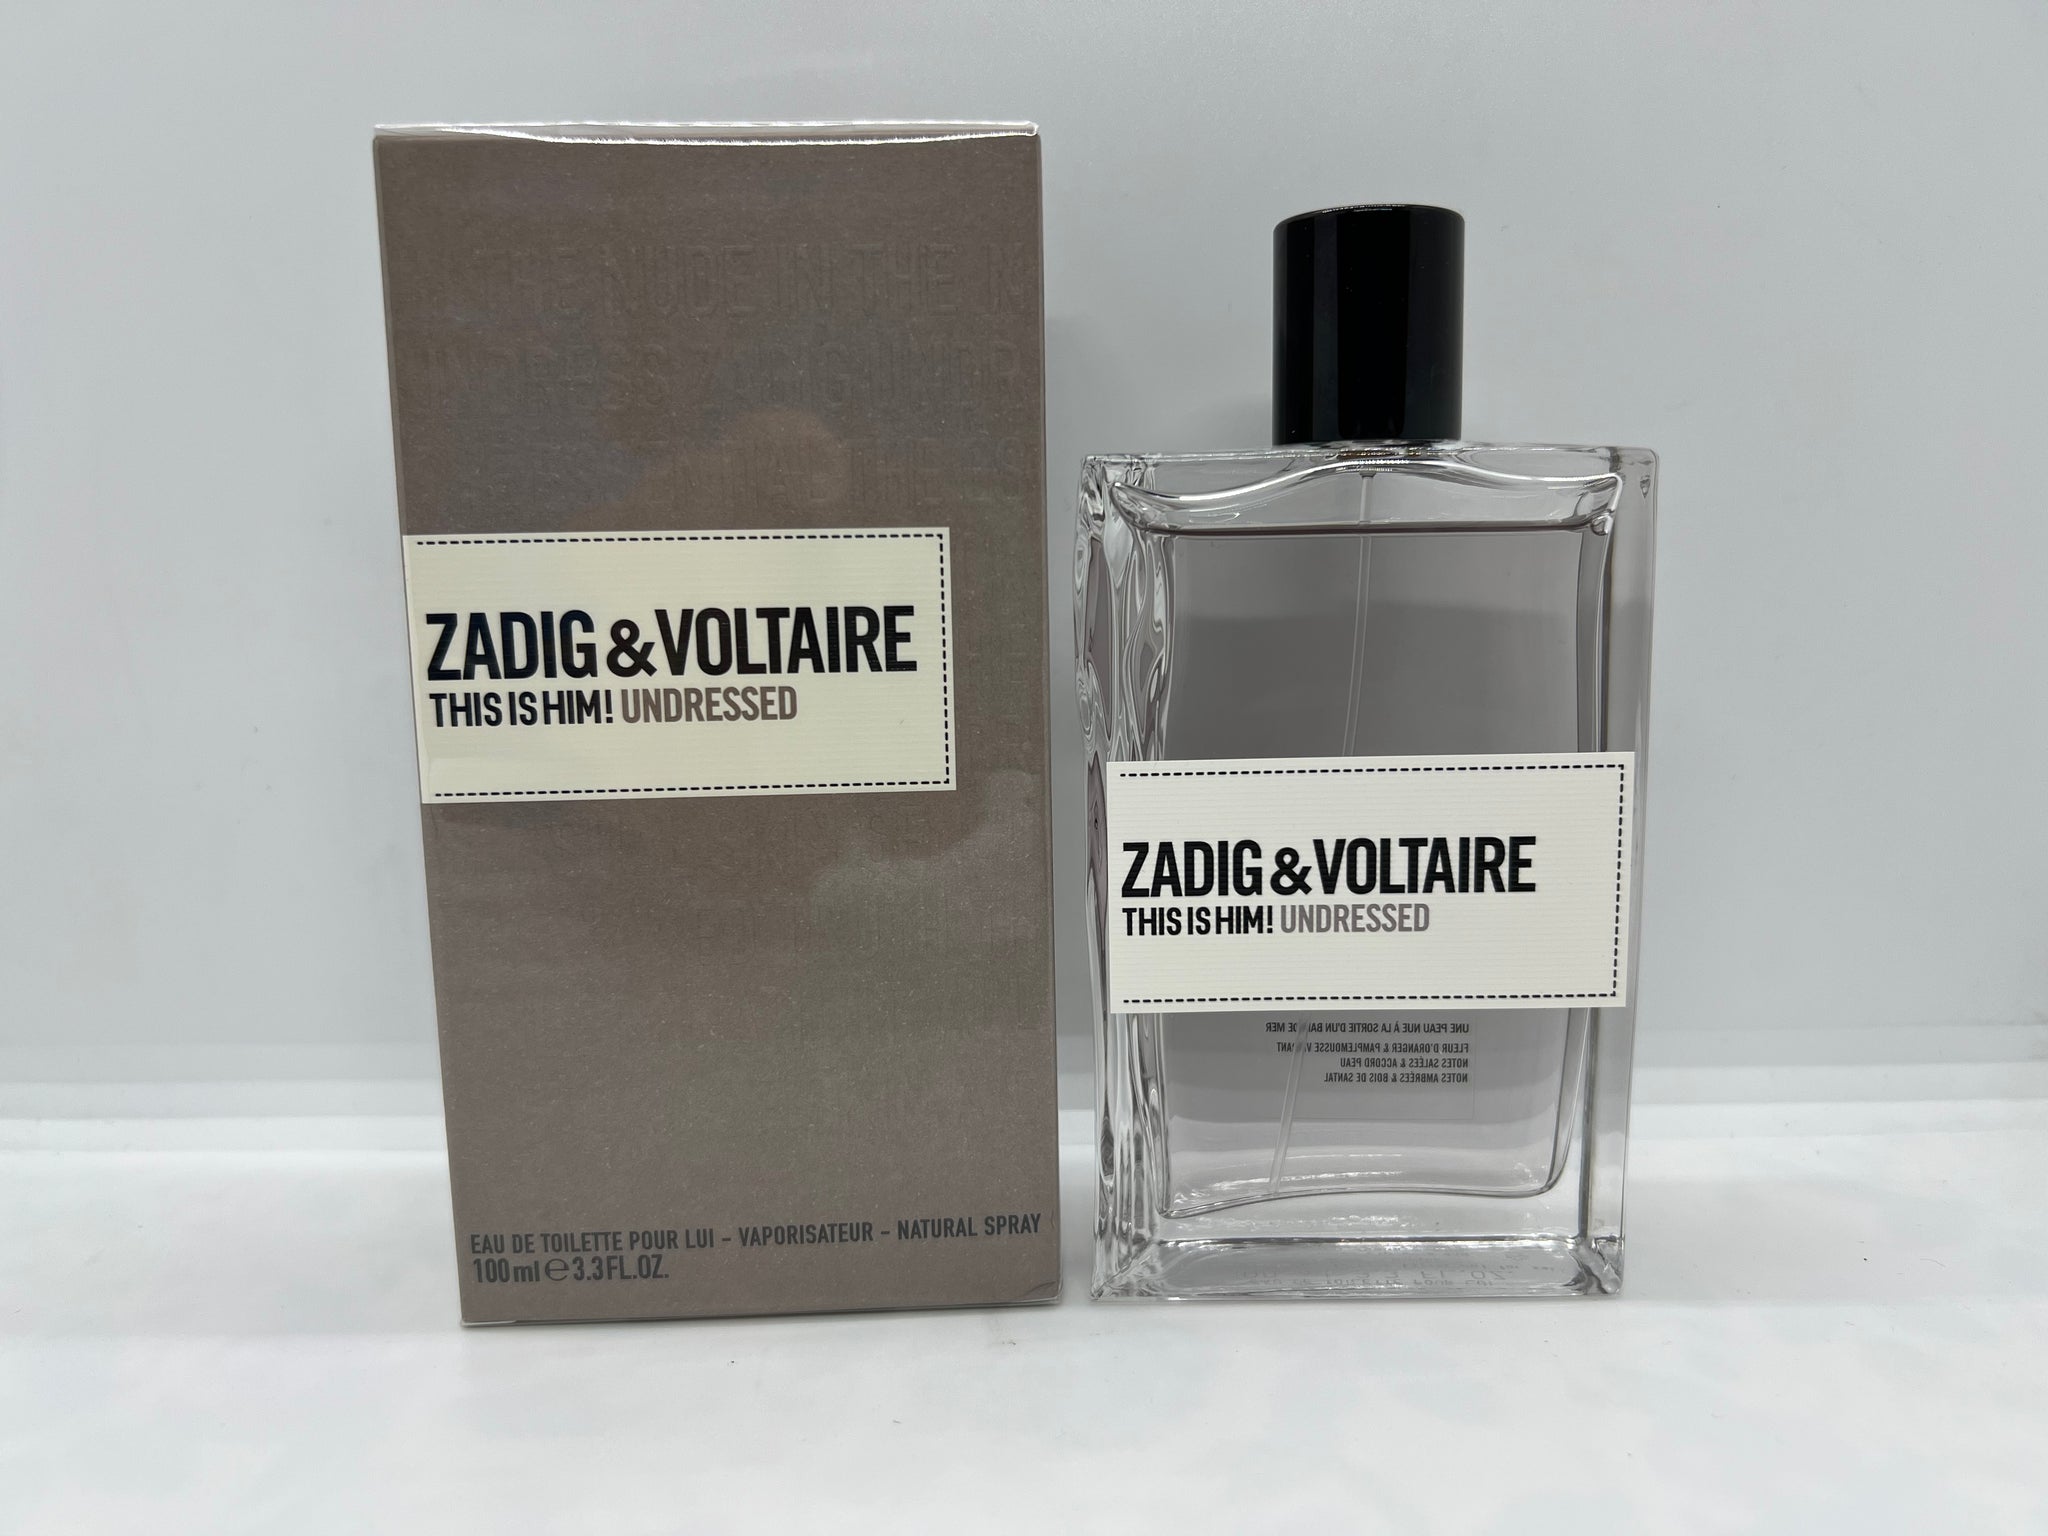 Zadig & Voltaire This is him Undressed